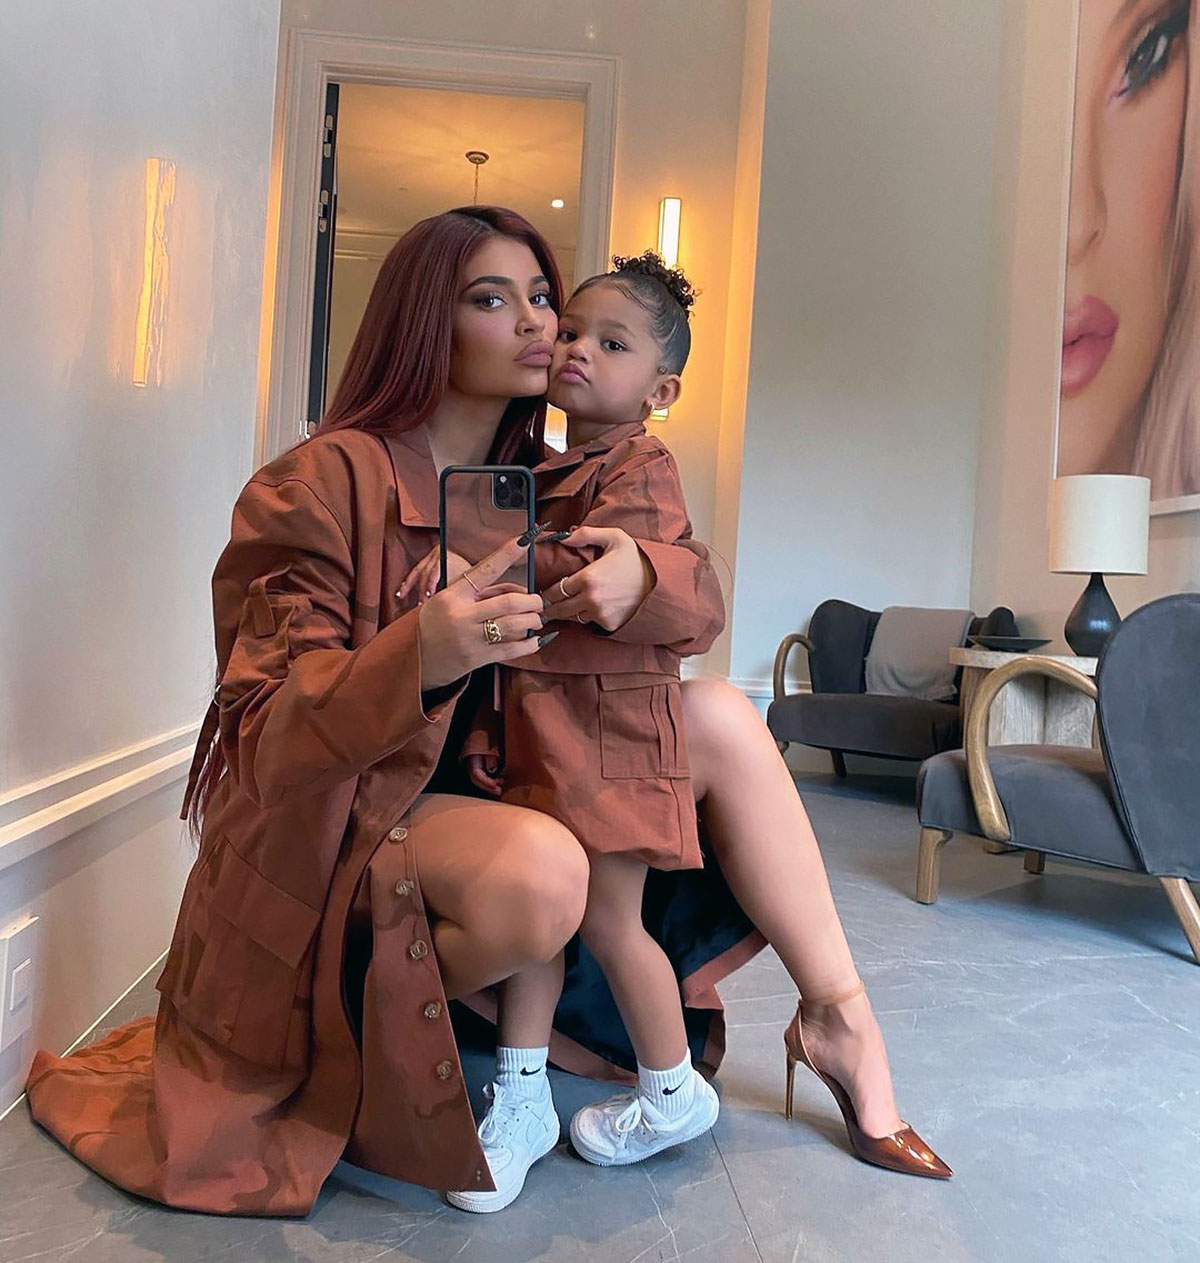 Kylie Jenner's Daughter Stormi Webster's First Purse Will be an